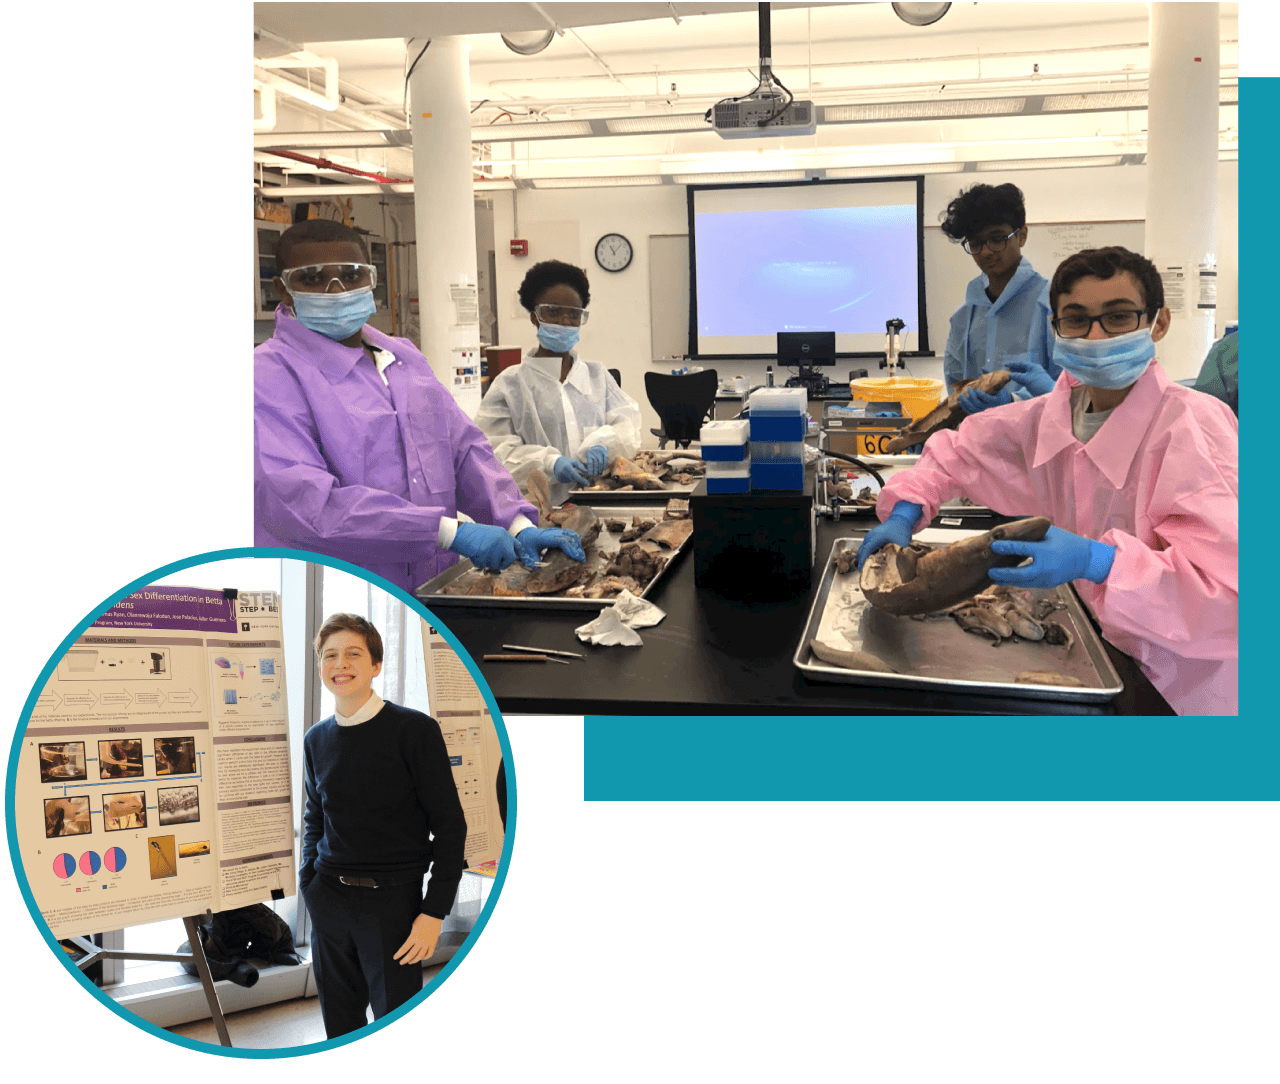 A collage of two images: In the first image, students are wearing protective equipment and holding lab specimens in a classroom. In the second image, a student standing next to their research presentation.